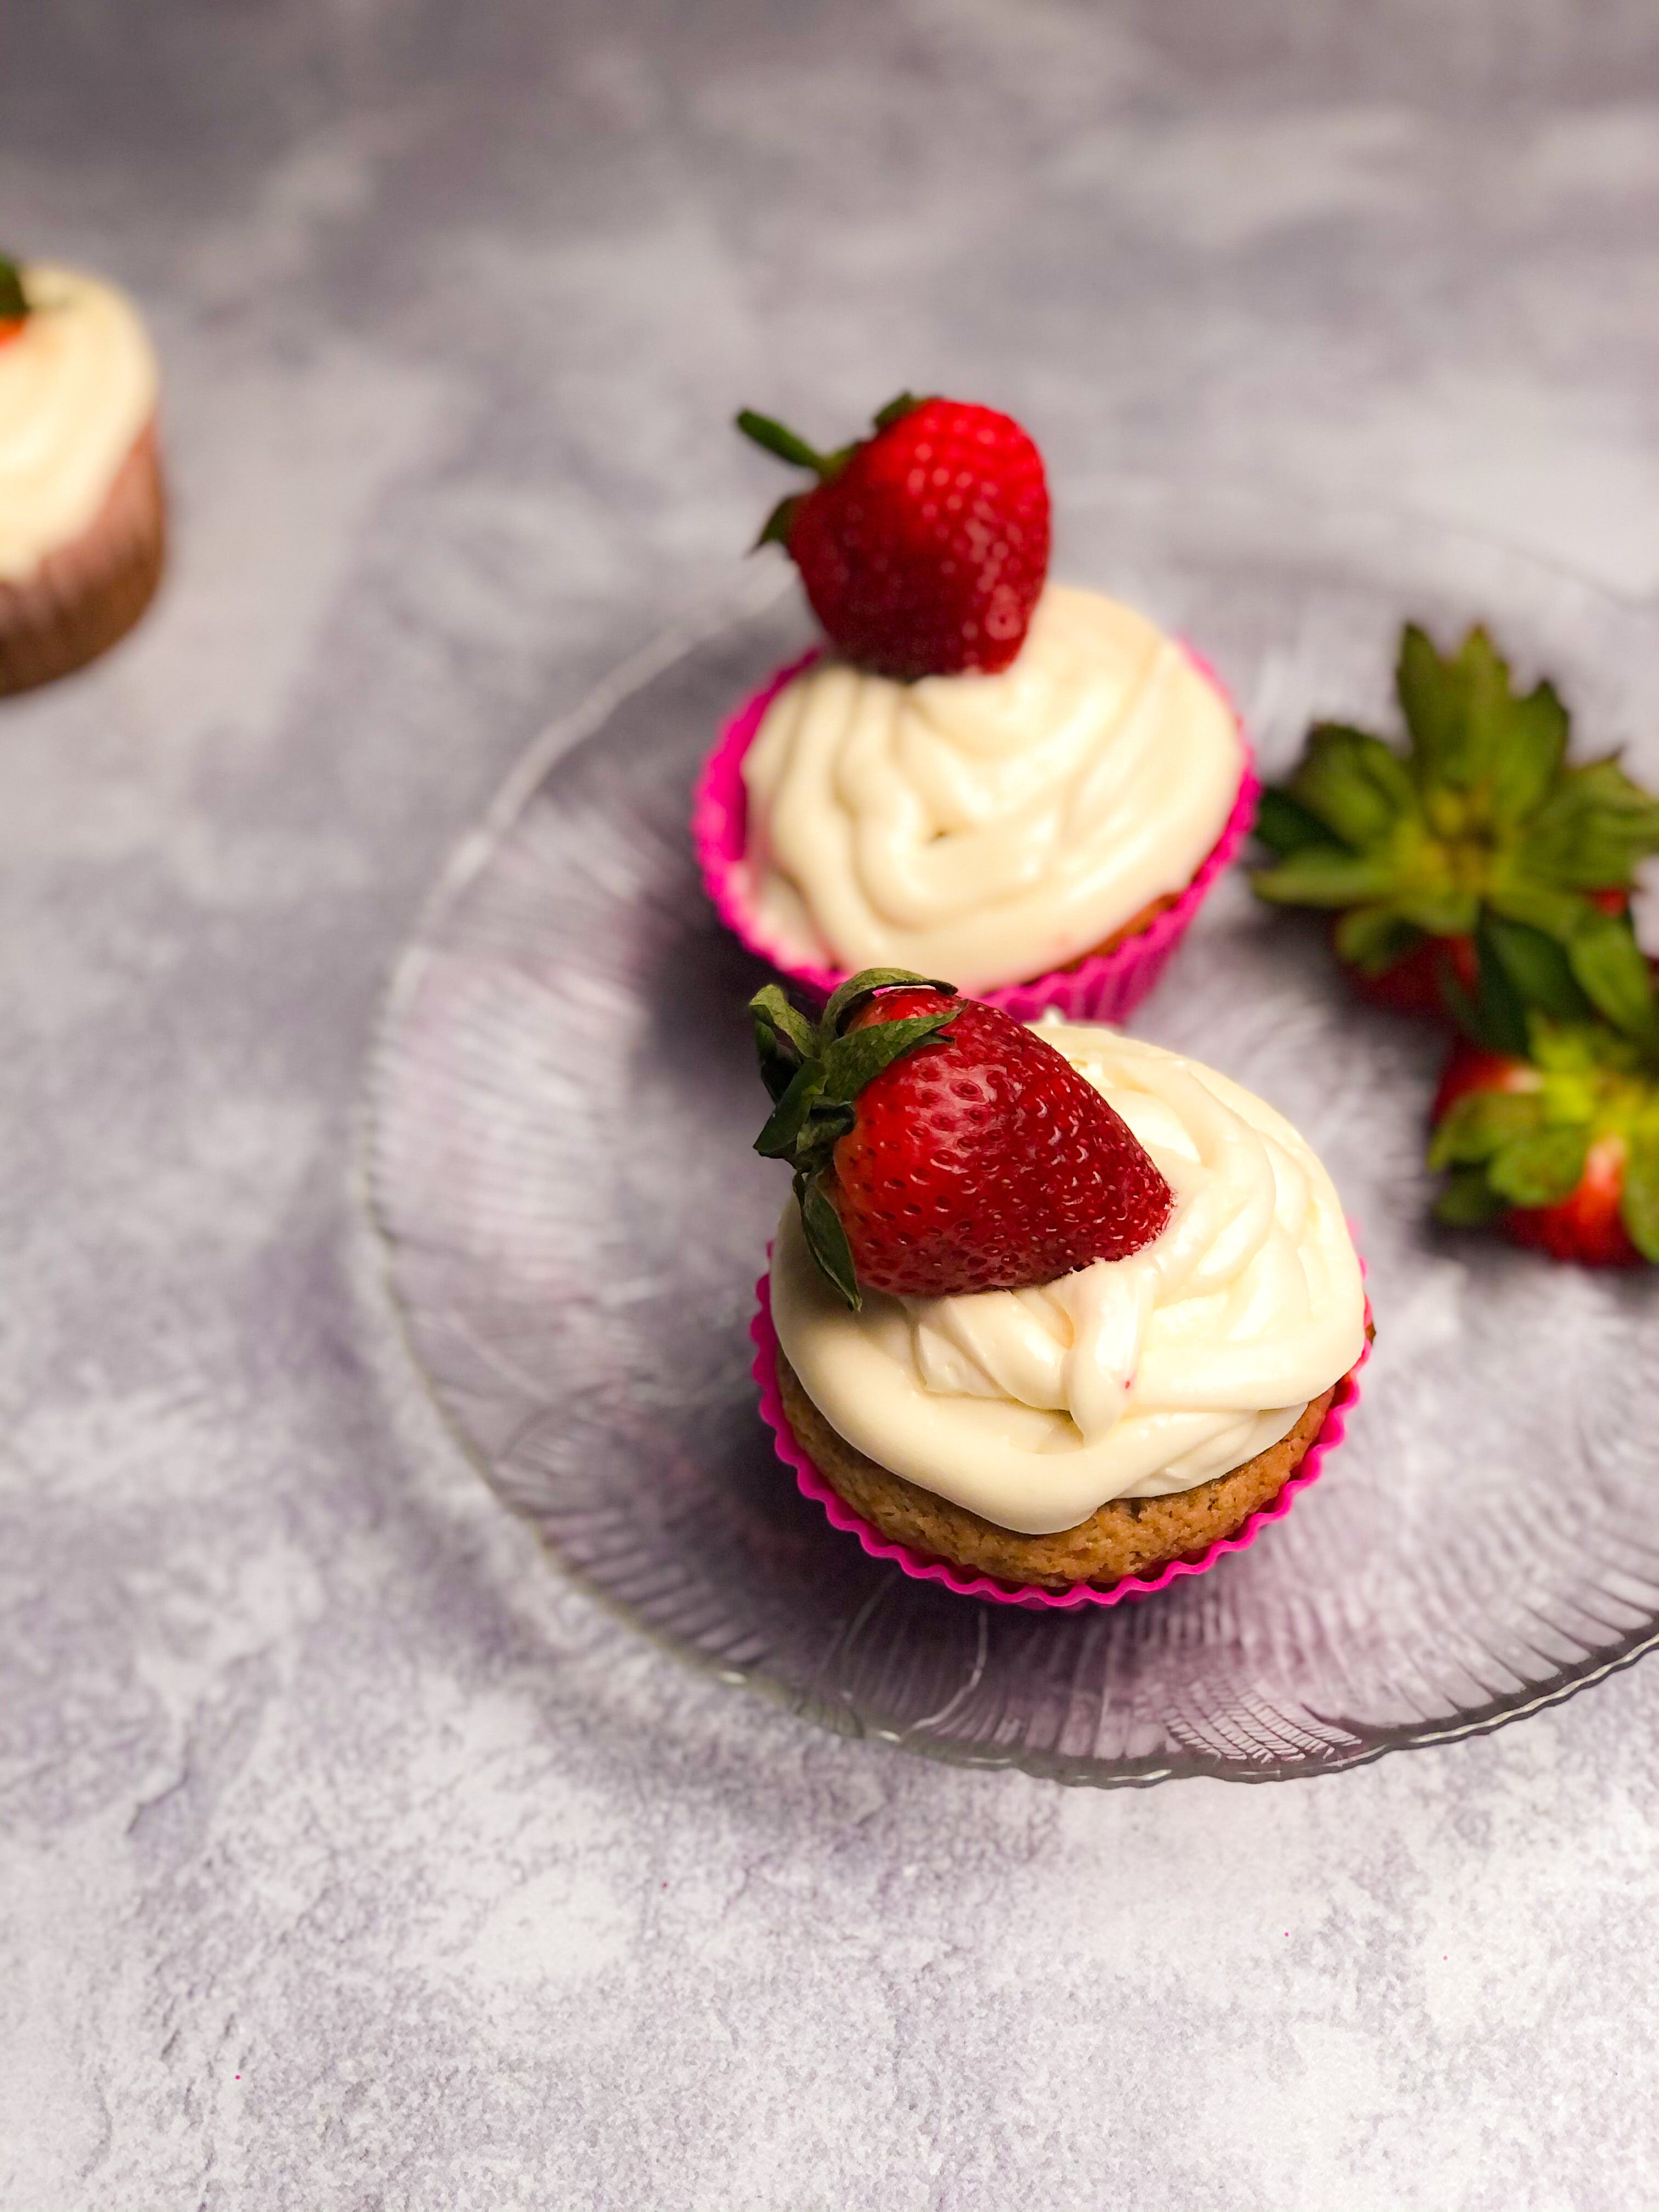 Homemade Strawberry Cupcakes with strawberries on top